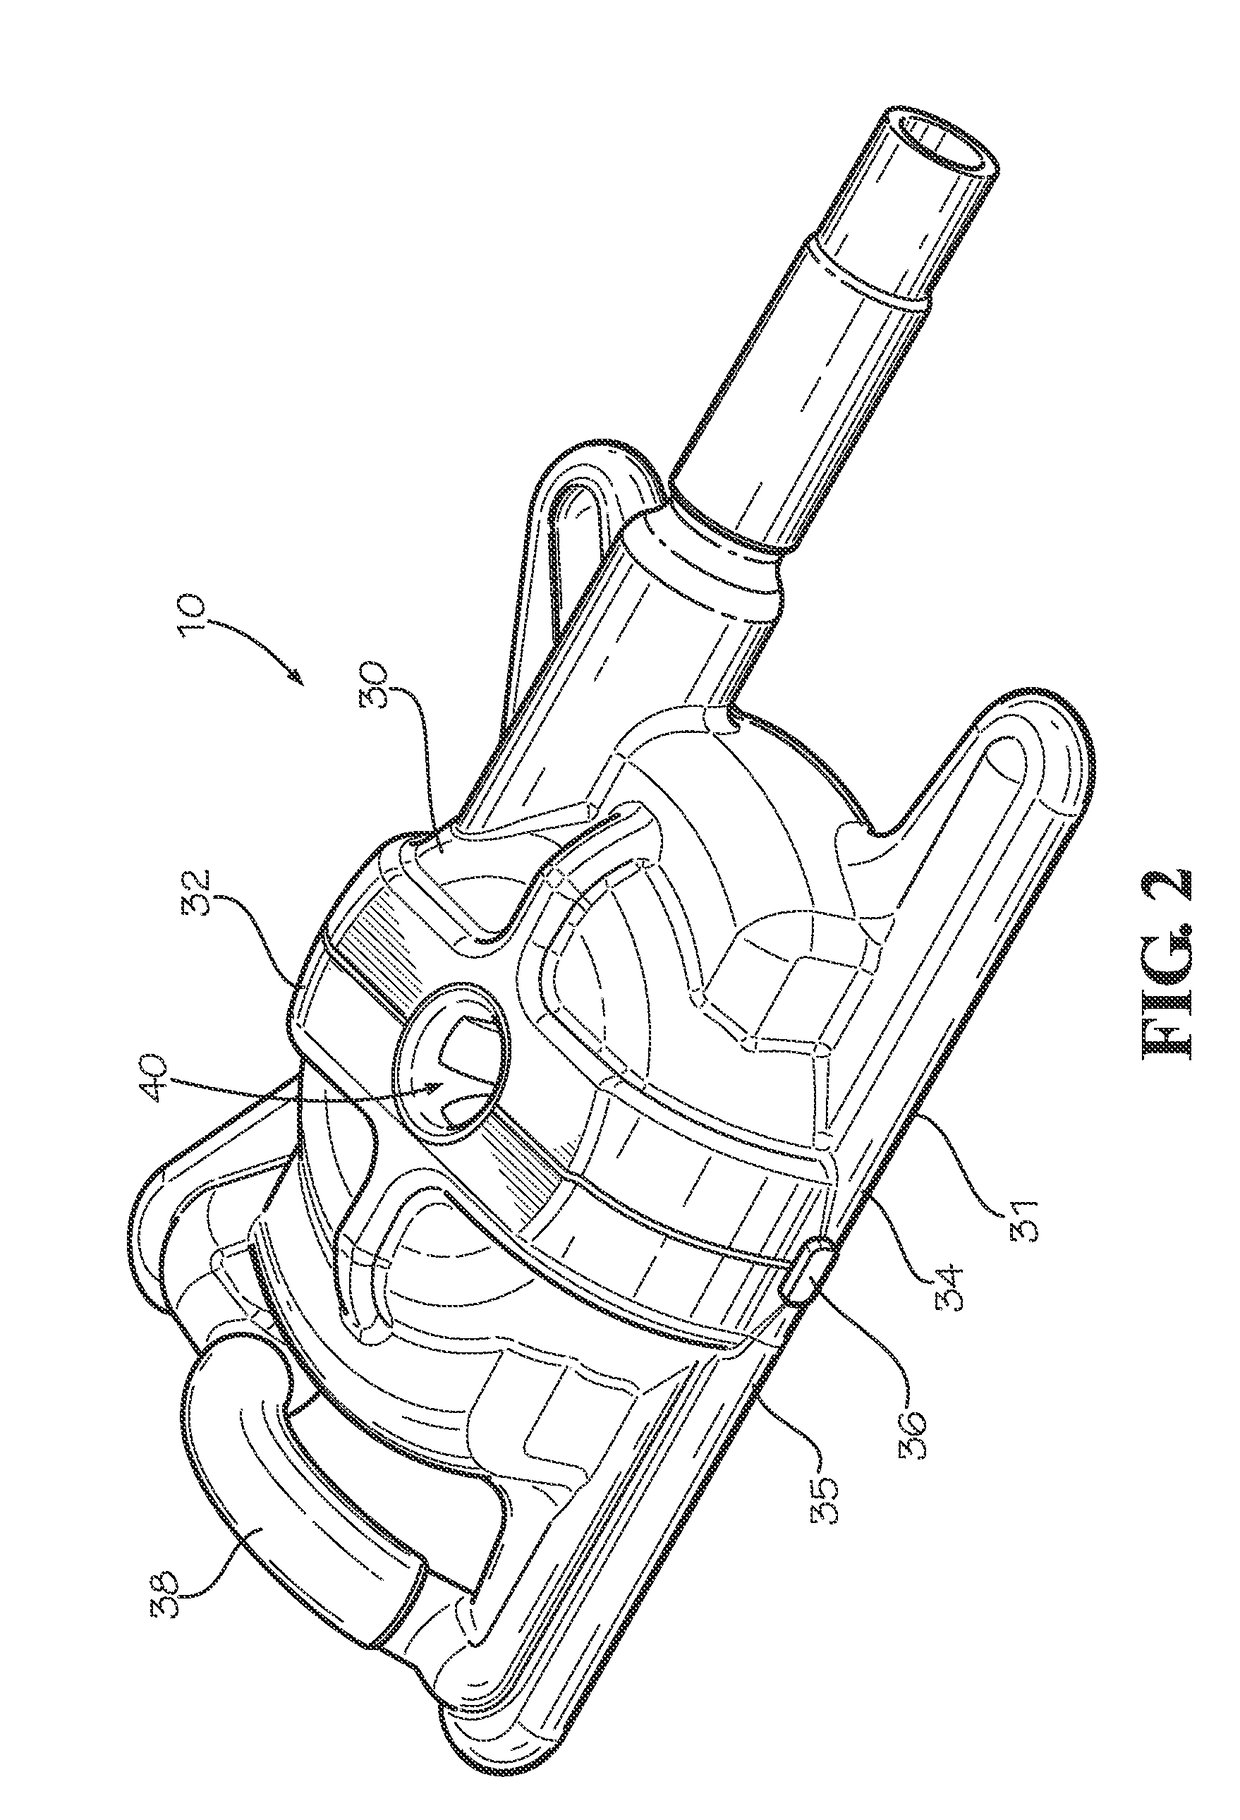 Flexible container liner wringing device